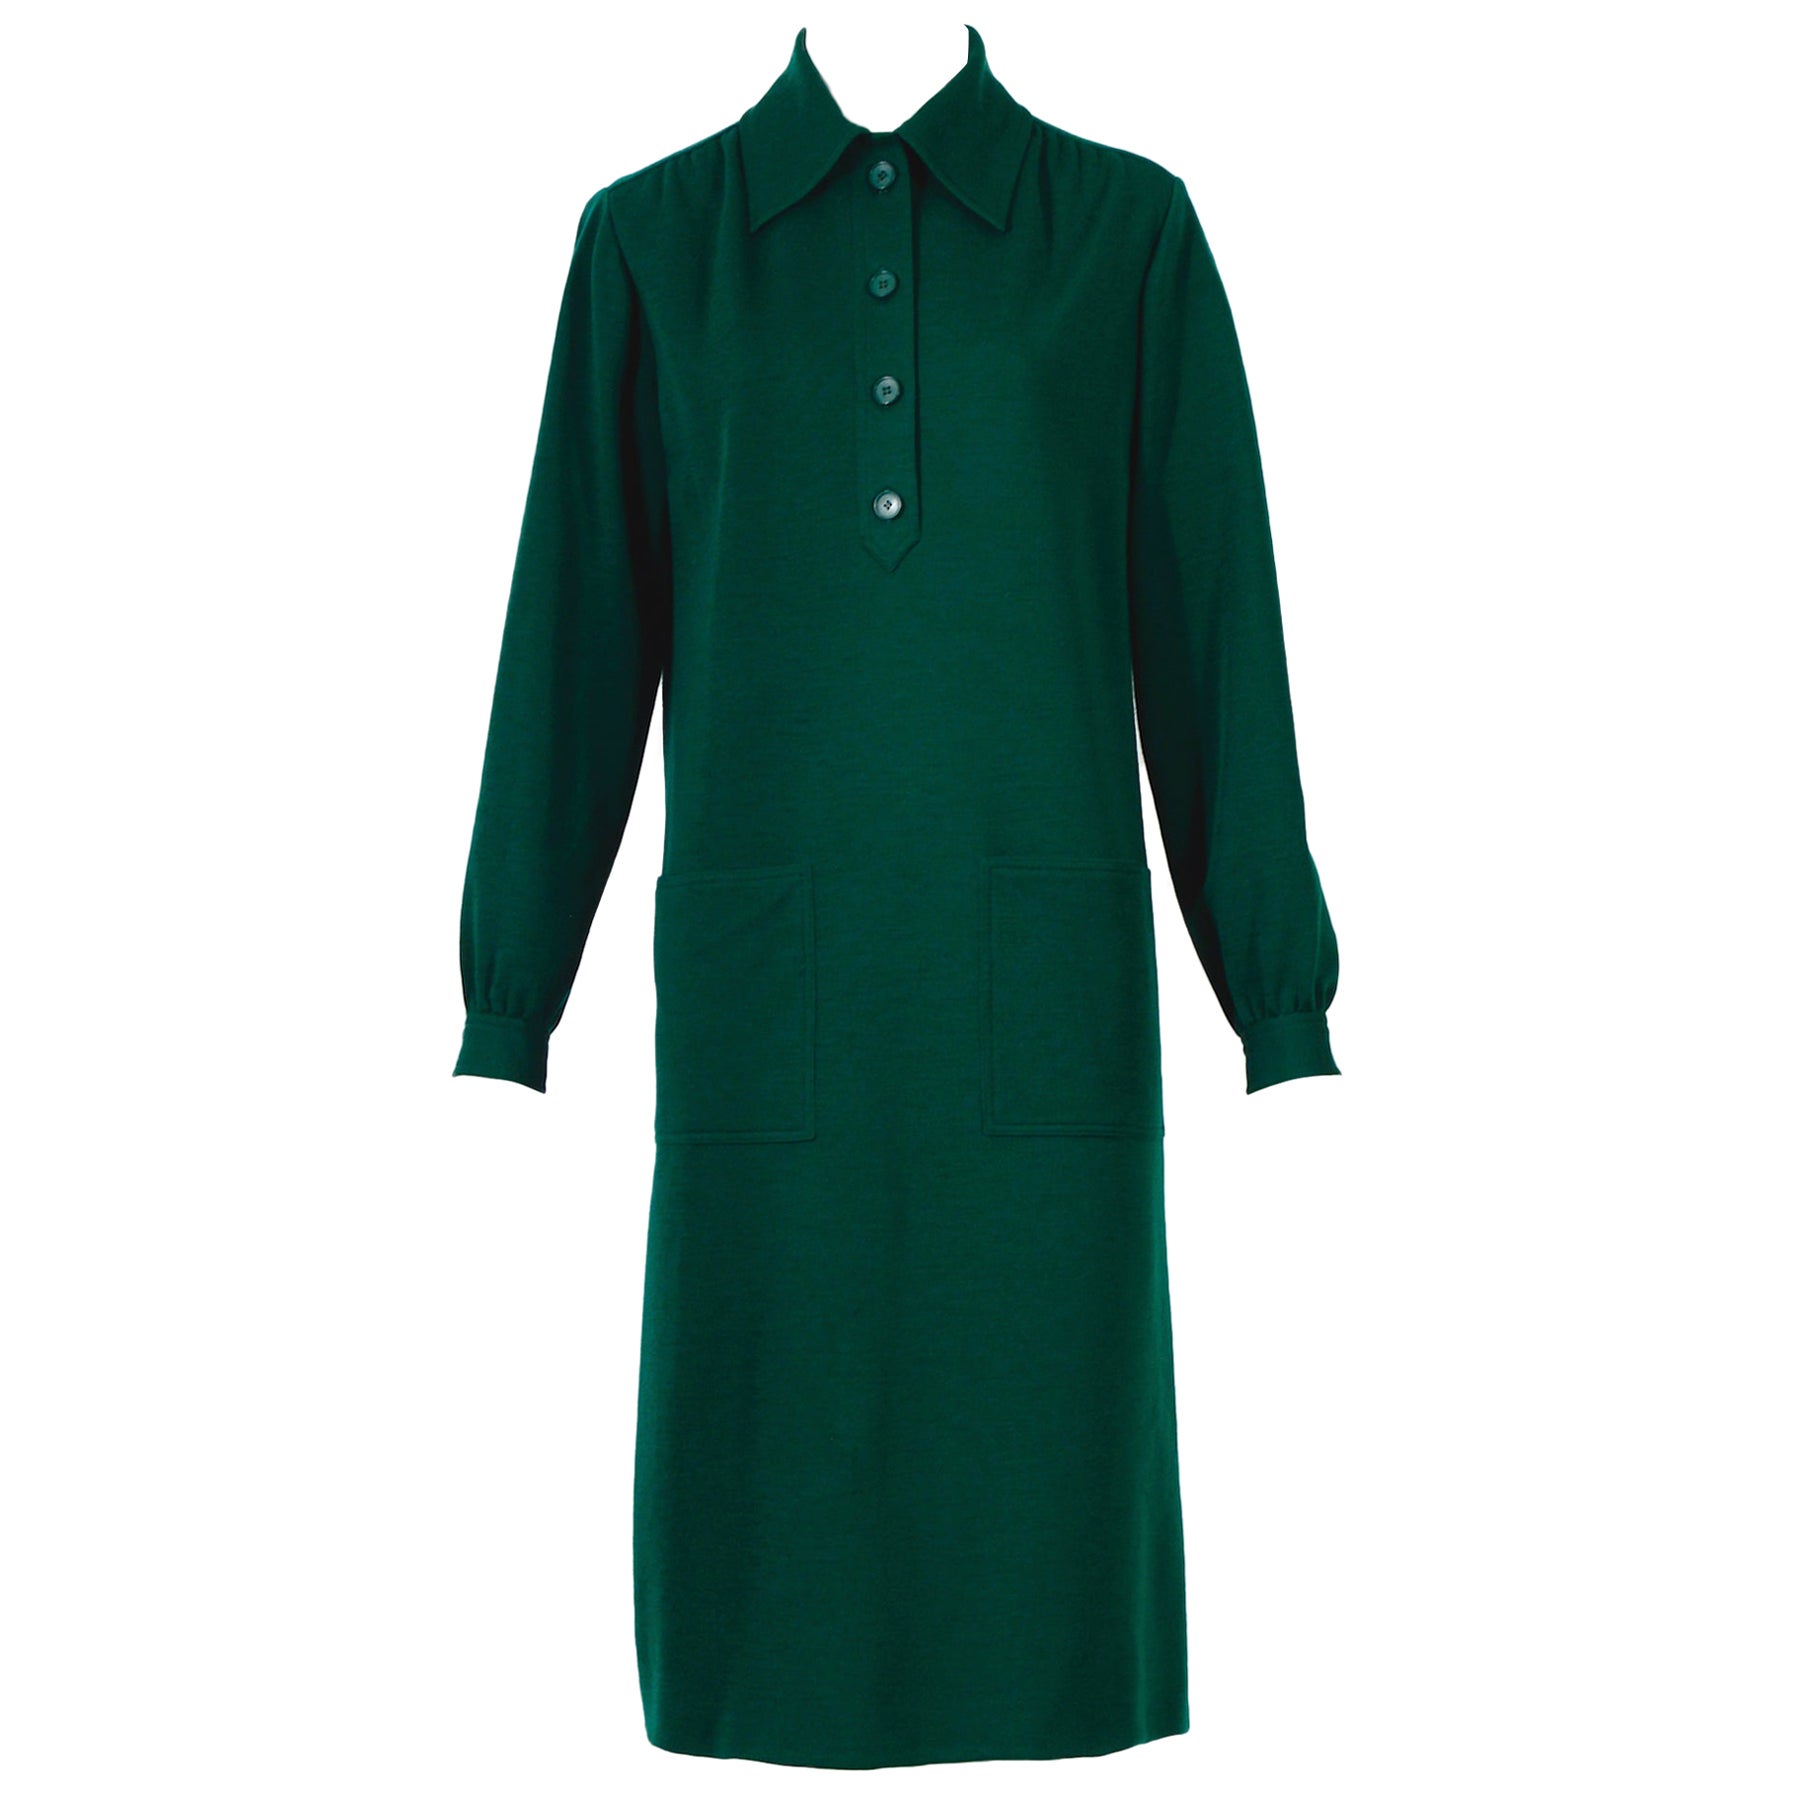 Yves Saint Laurent "rive gauche" by Yves vintage 1970s green wool  dress For Sale